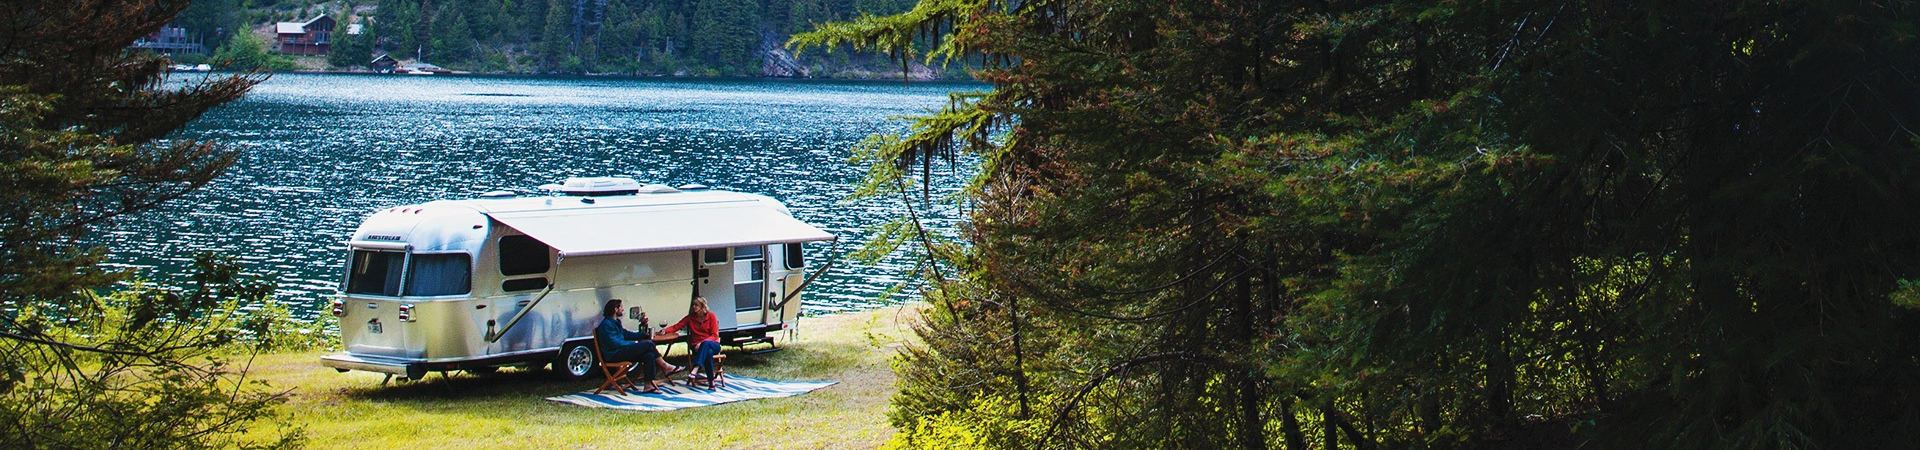 Couple having wine next to their Airstream travel trailer next to a wooded lake